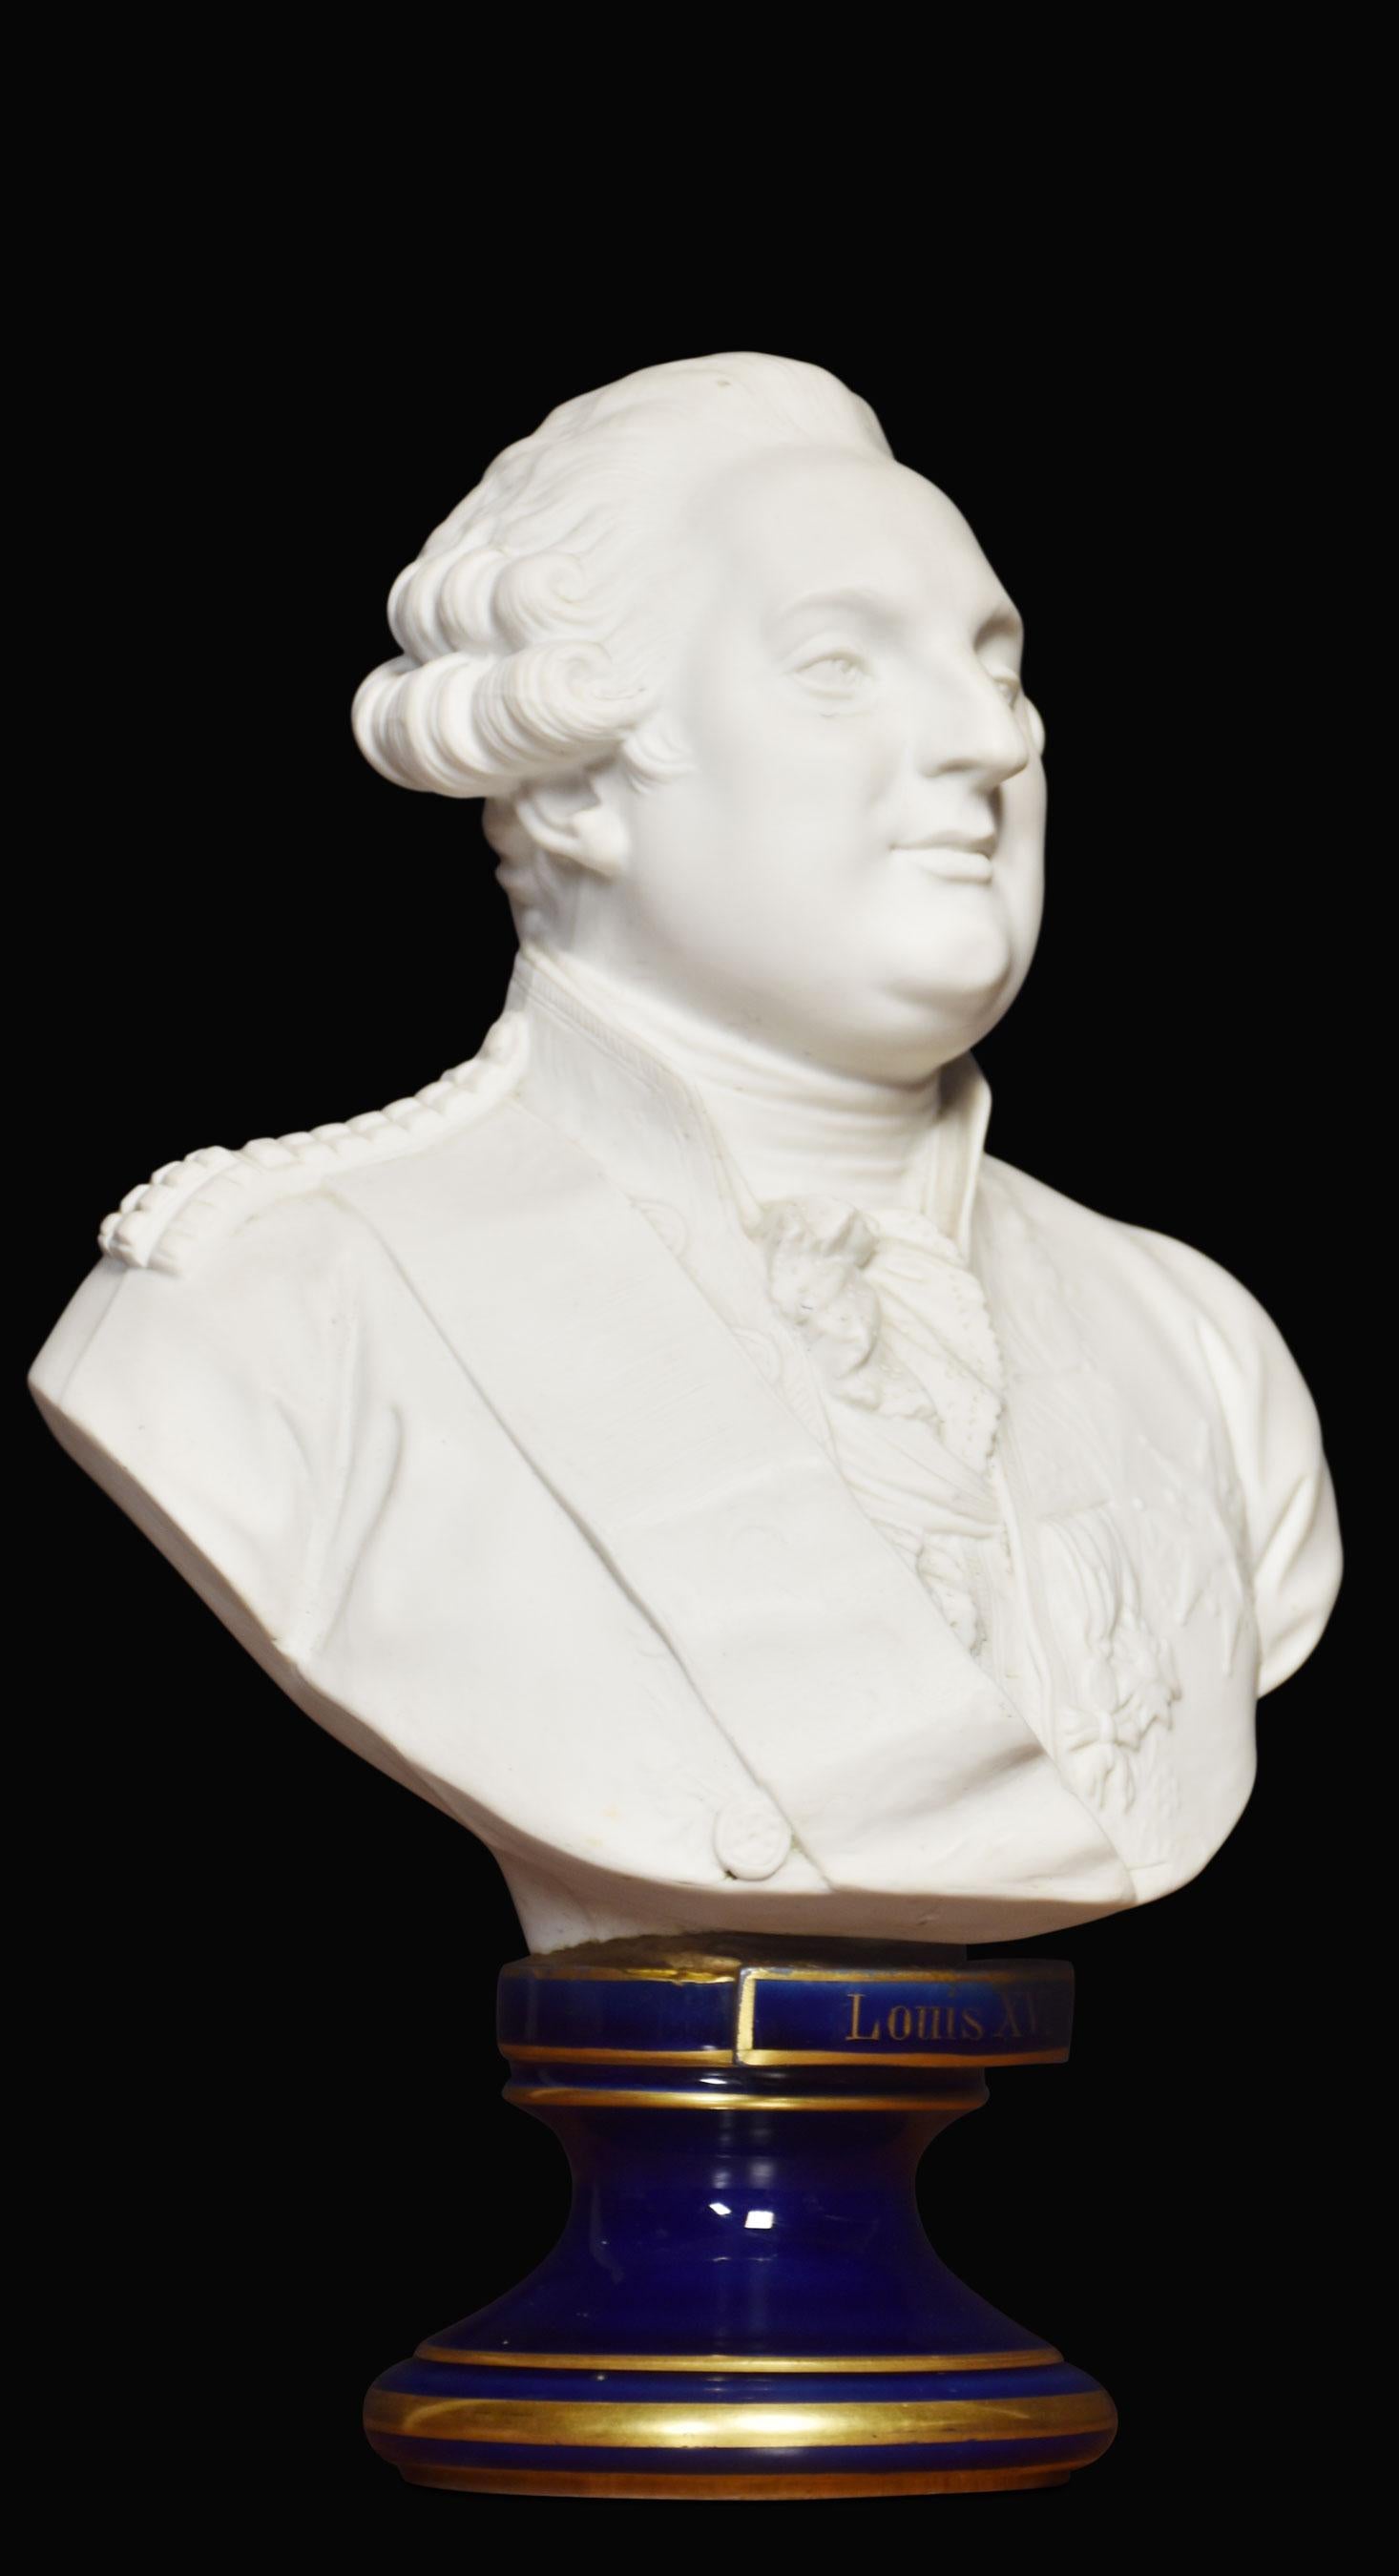 French Parianware bust of King Louis XVI raised up on blue gilded porcelain stepped circular base.
Dimensions
Height 11.5 inches
Width 8 inches
Depth 5 inches.